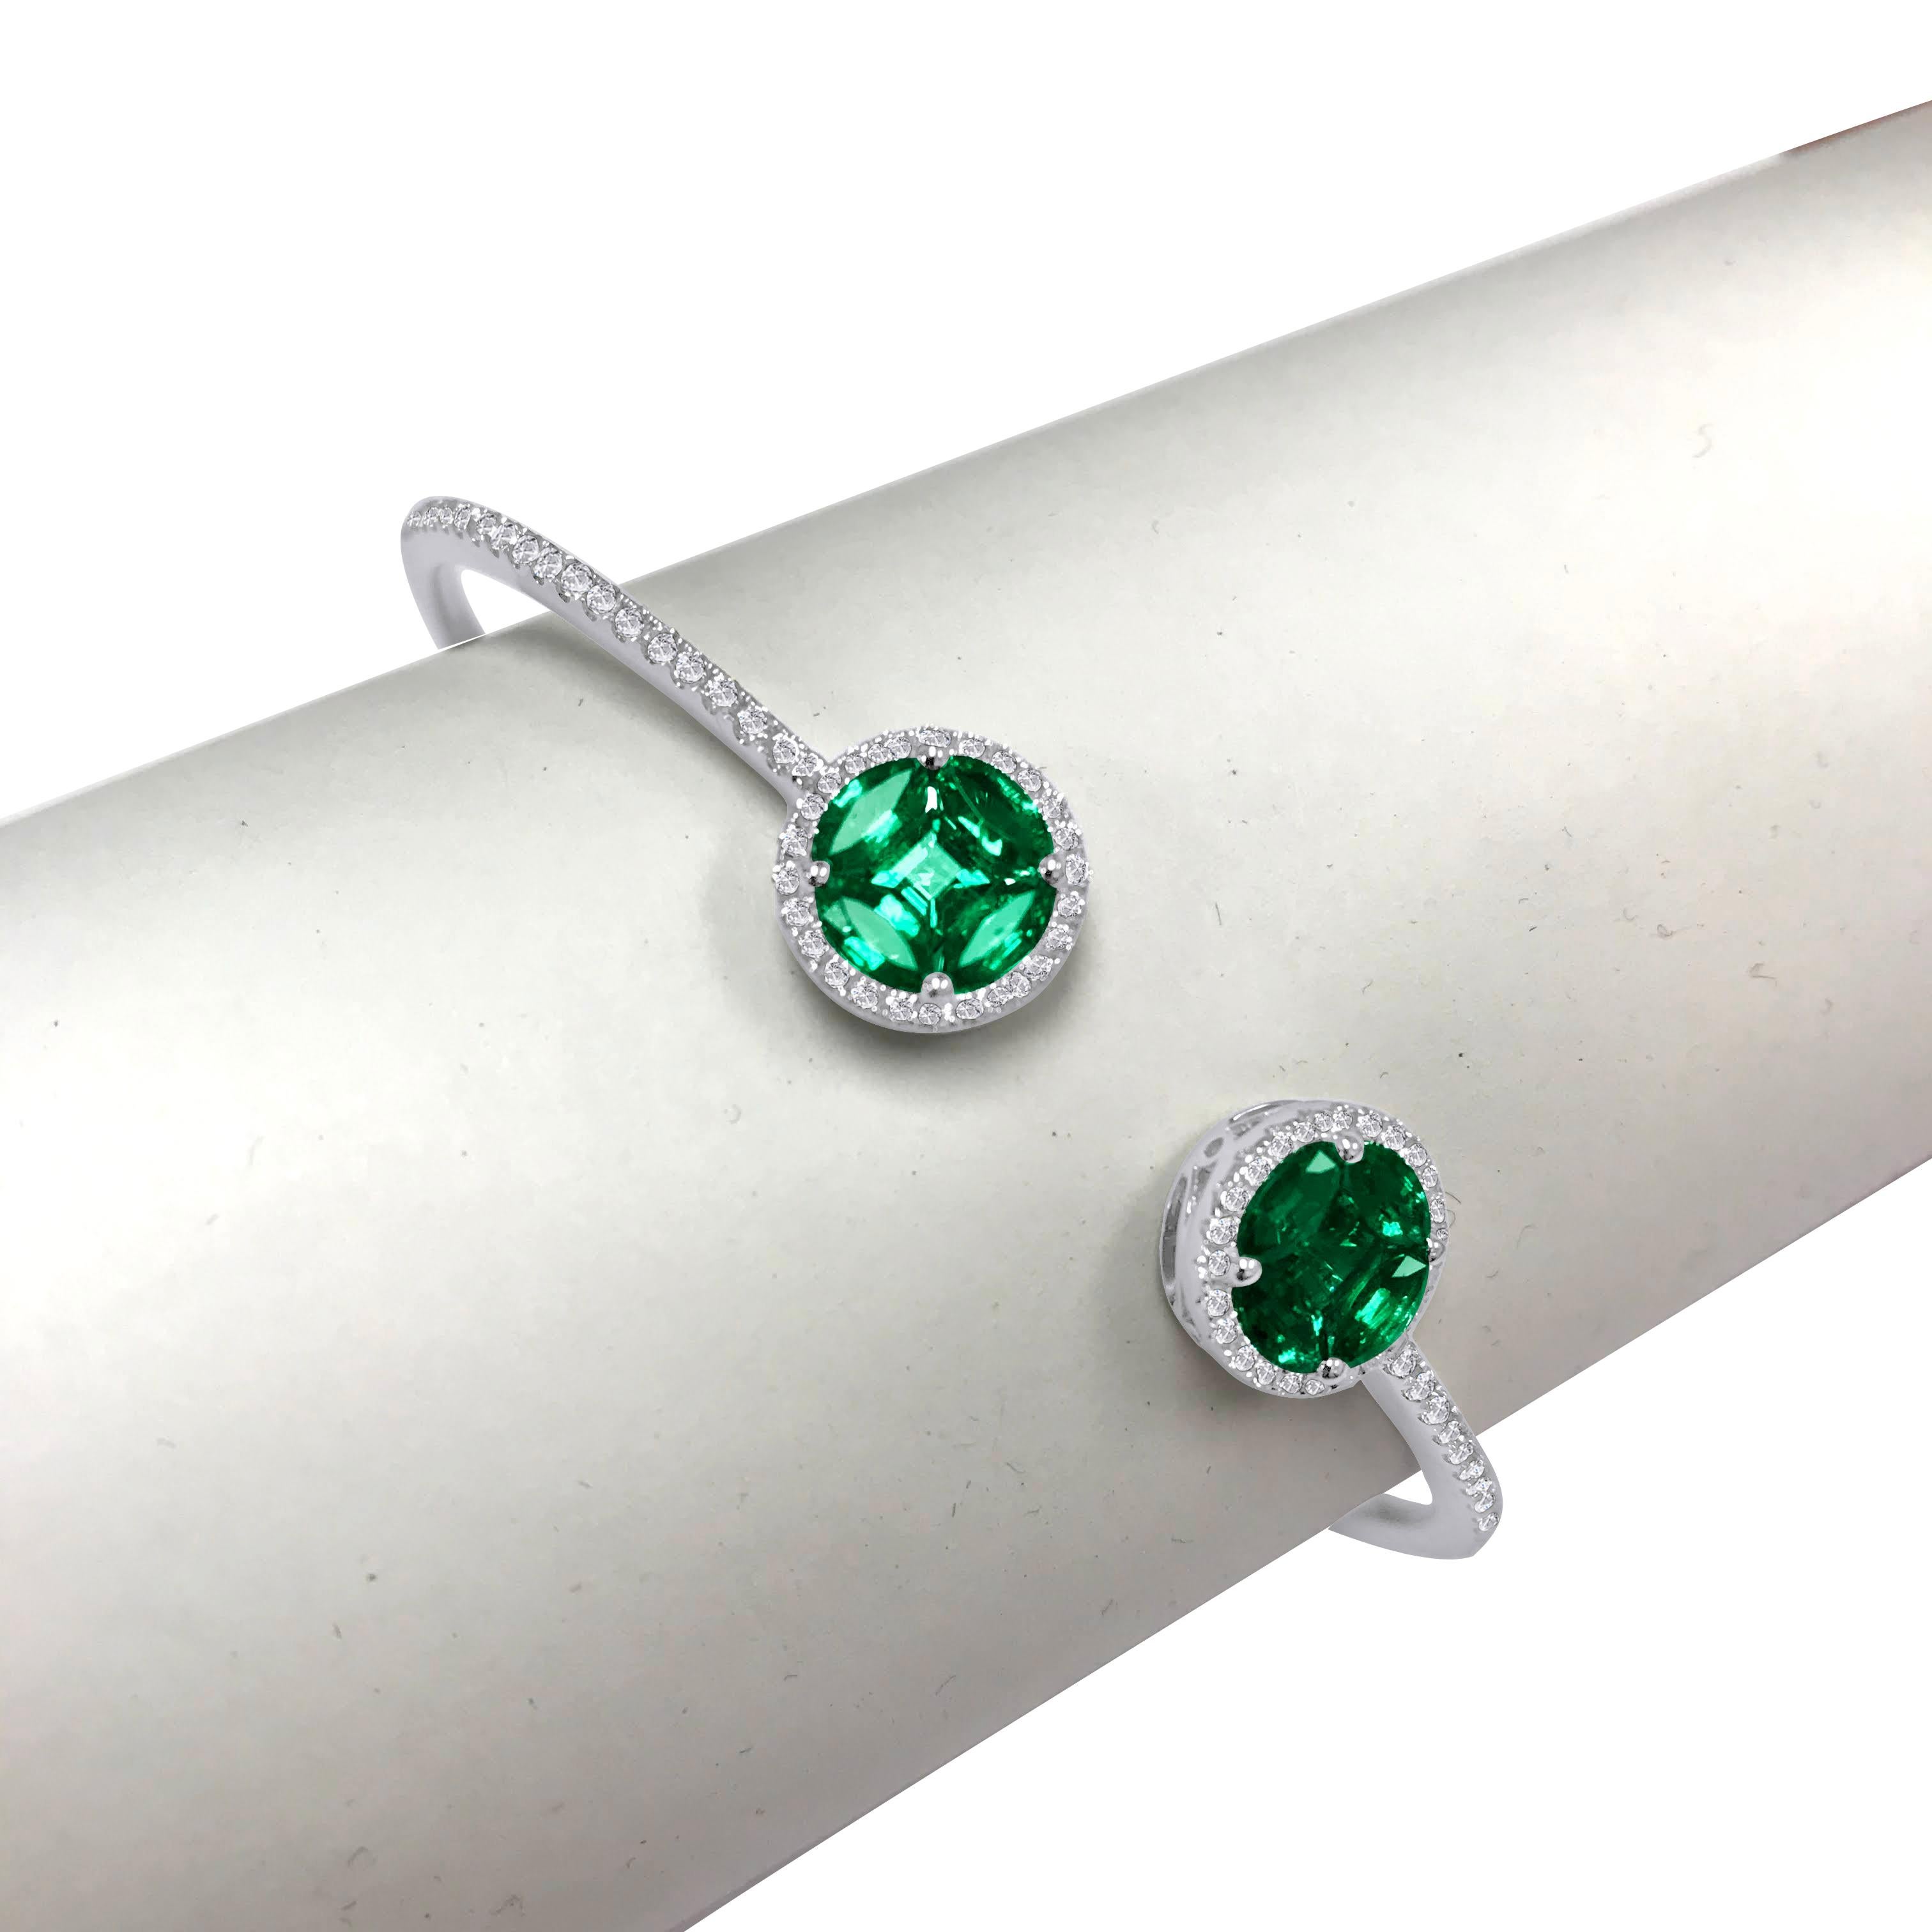 The heads on this bangle are formed by two clusters of 10 emeralds. Each head is a round illusion formed by four marquise cut and one square cut emerald. Each cluster is wrapped in a tight halo of round white diamonds, which also extends to the